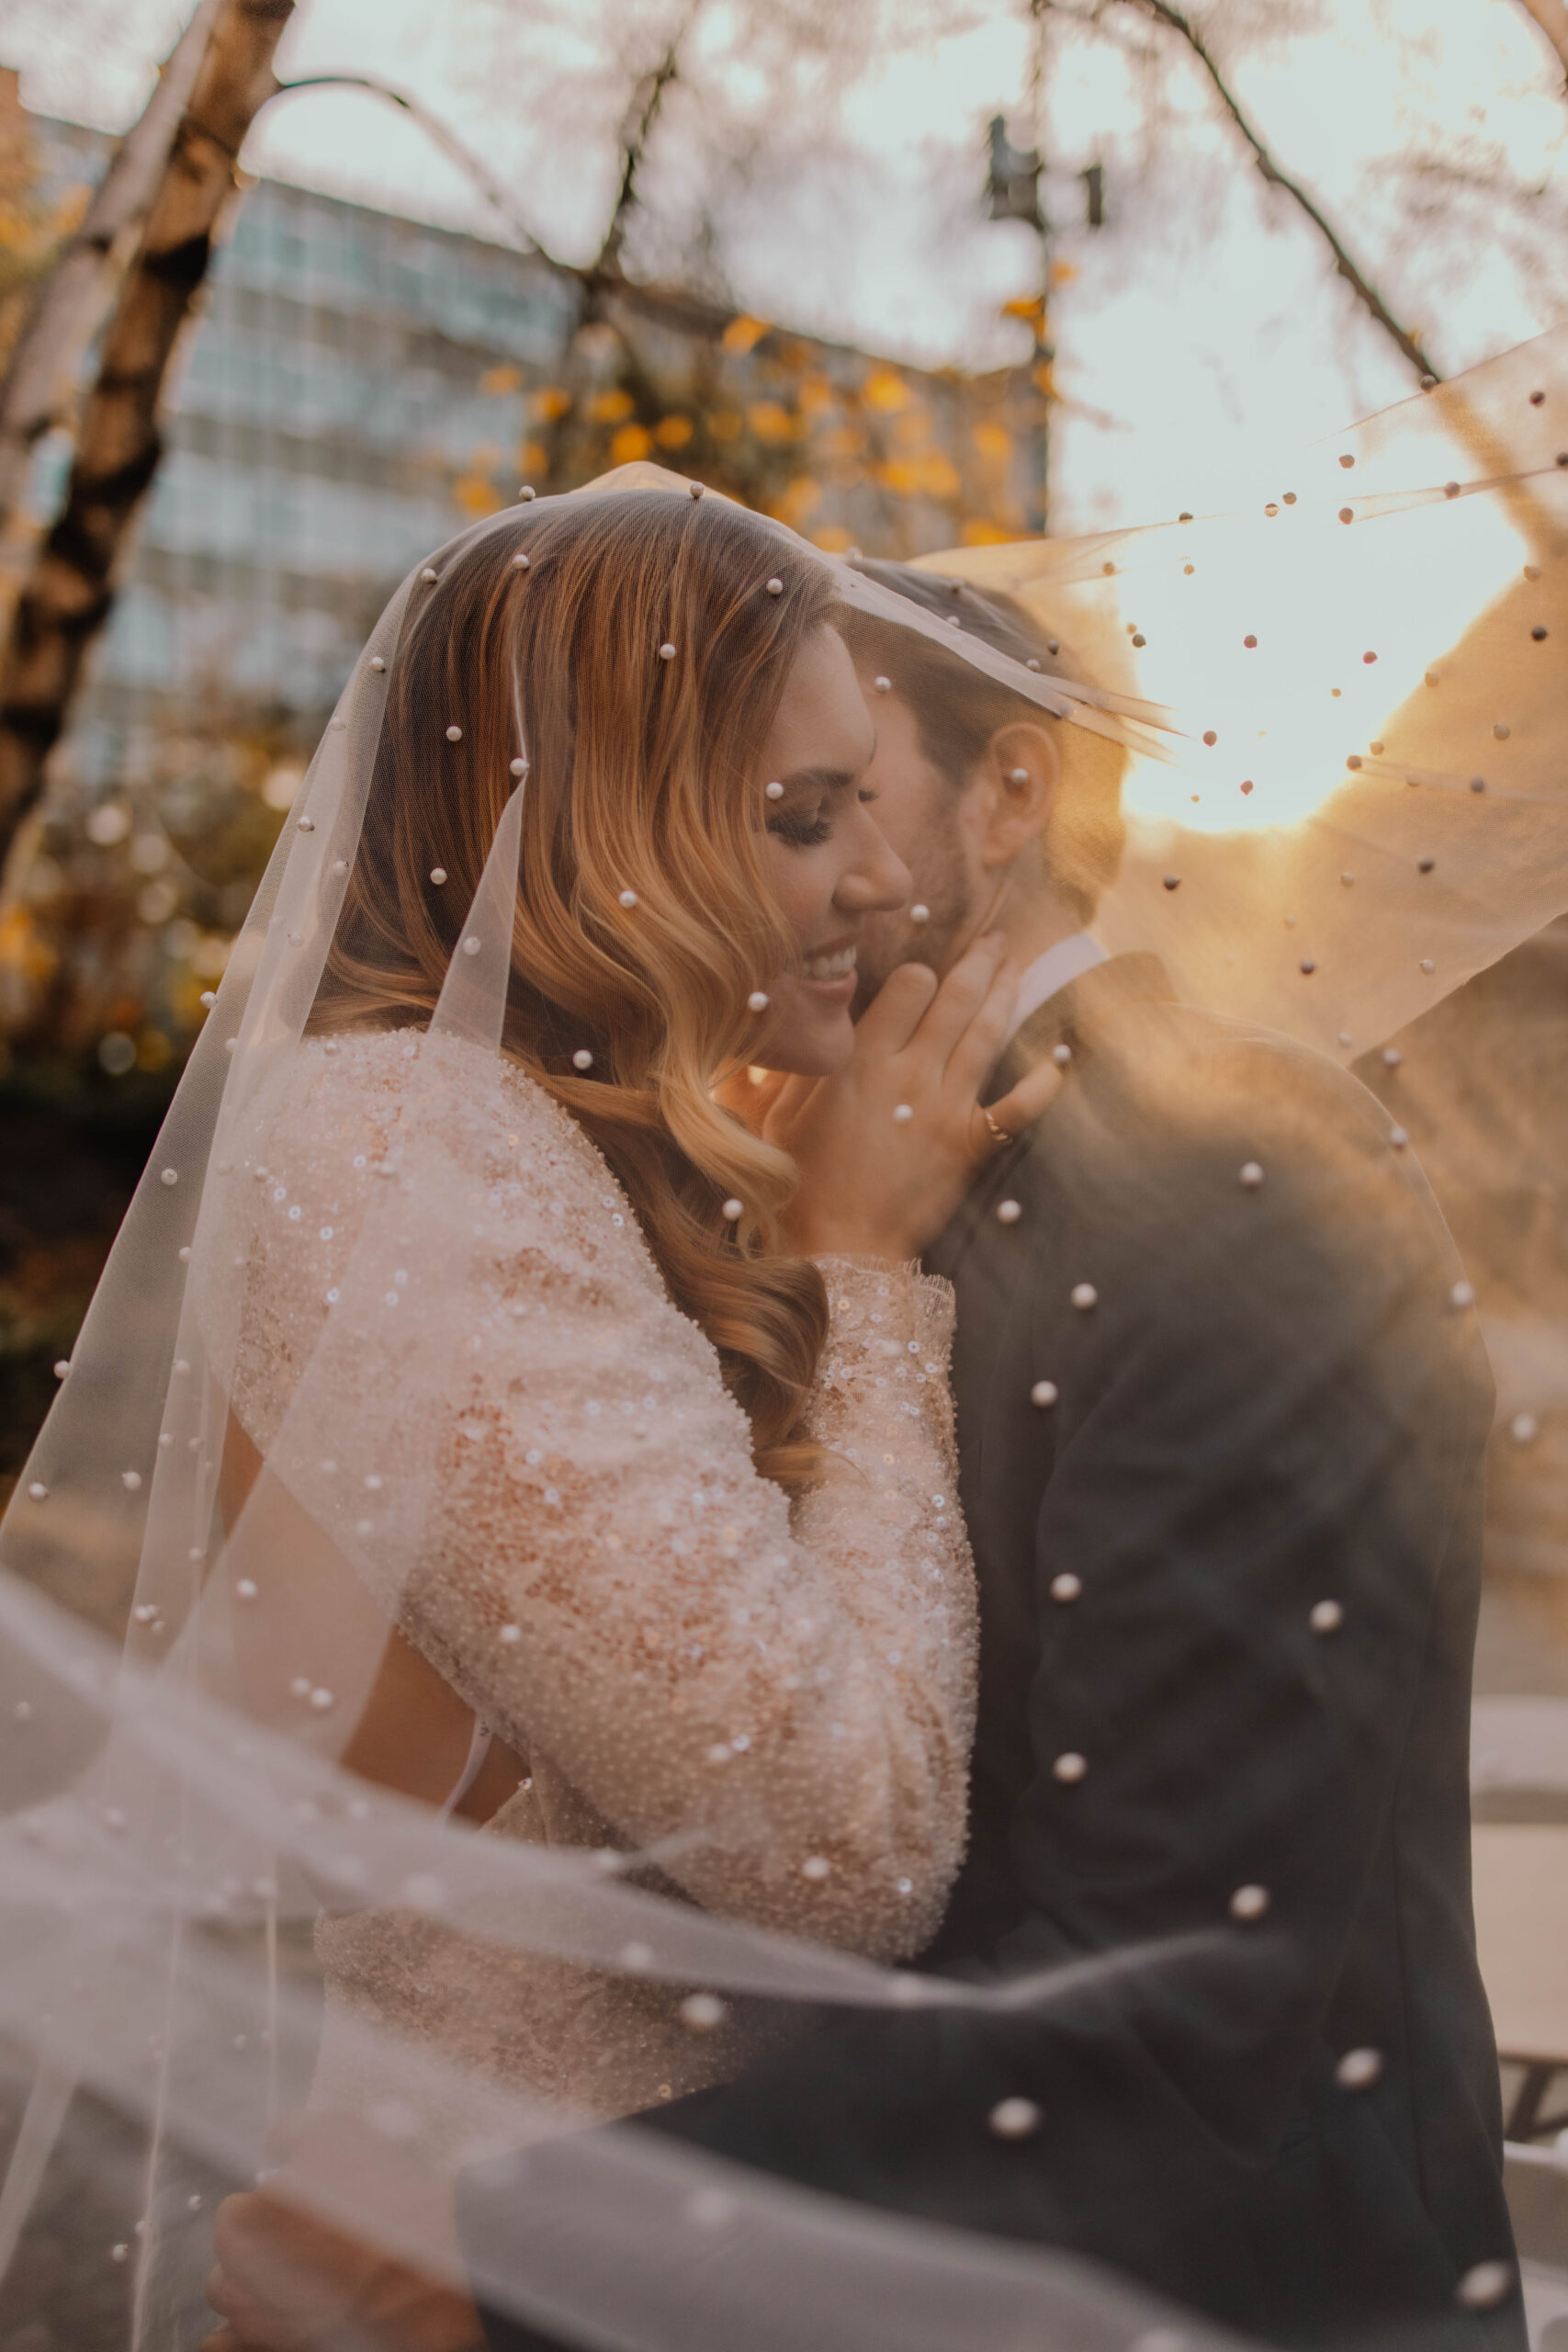 Sunset portrait shot of a bride and groom underneath a veil with pearls